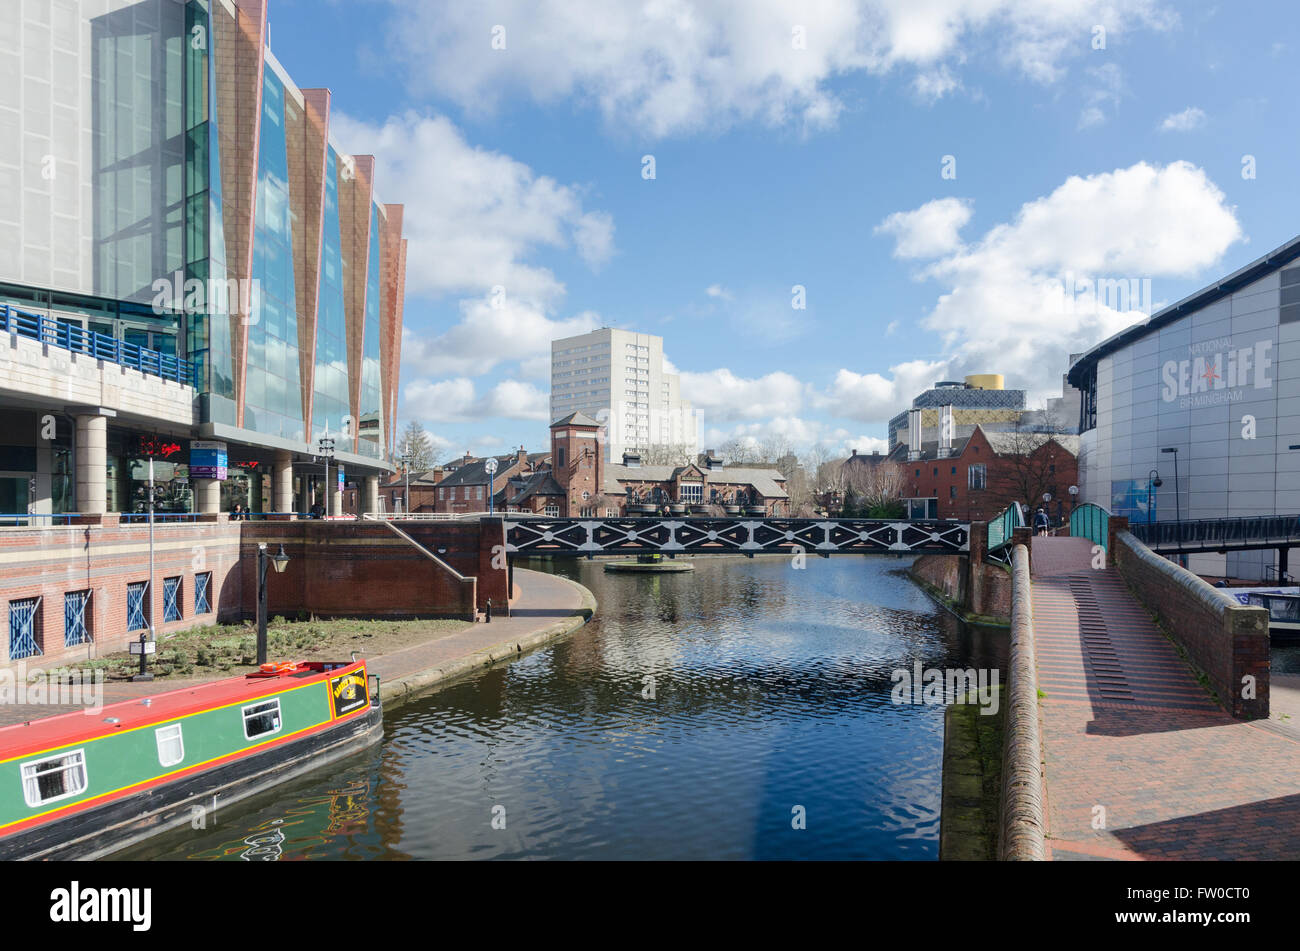 View of Birmingham canals including Sealife Centre and Barclaycard Arena Stock Photo